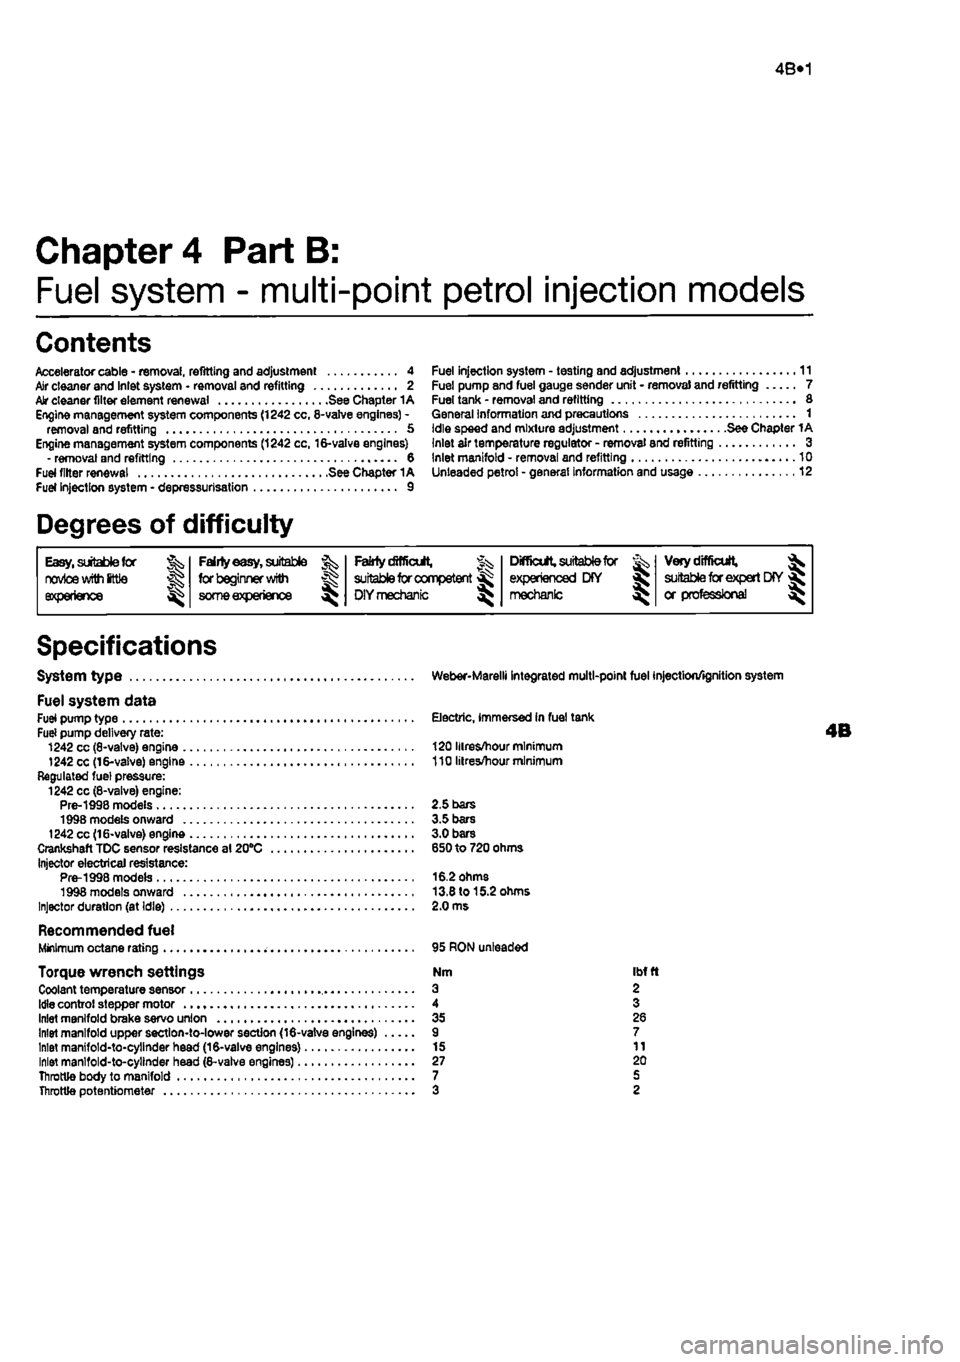 FIAT PUNTO 1996 176 / 1.G Service Manual 
4B*1 
Chapter 4 Part B: 
Fuel system - multi-point petrol injection models 
Contents 
Accelerator cable - removal, refitting and adjustment 4 Air cleaner and Inlet system • removal and refitting 2 